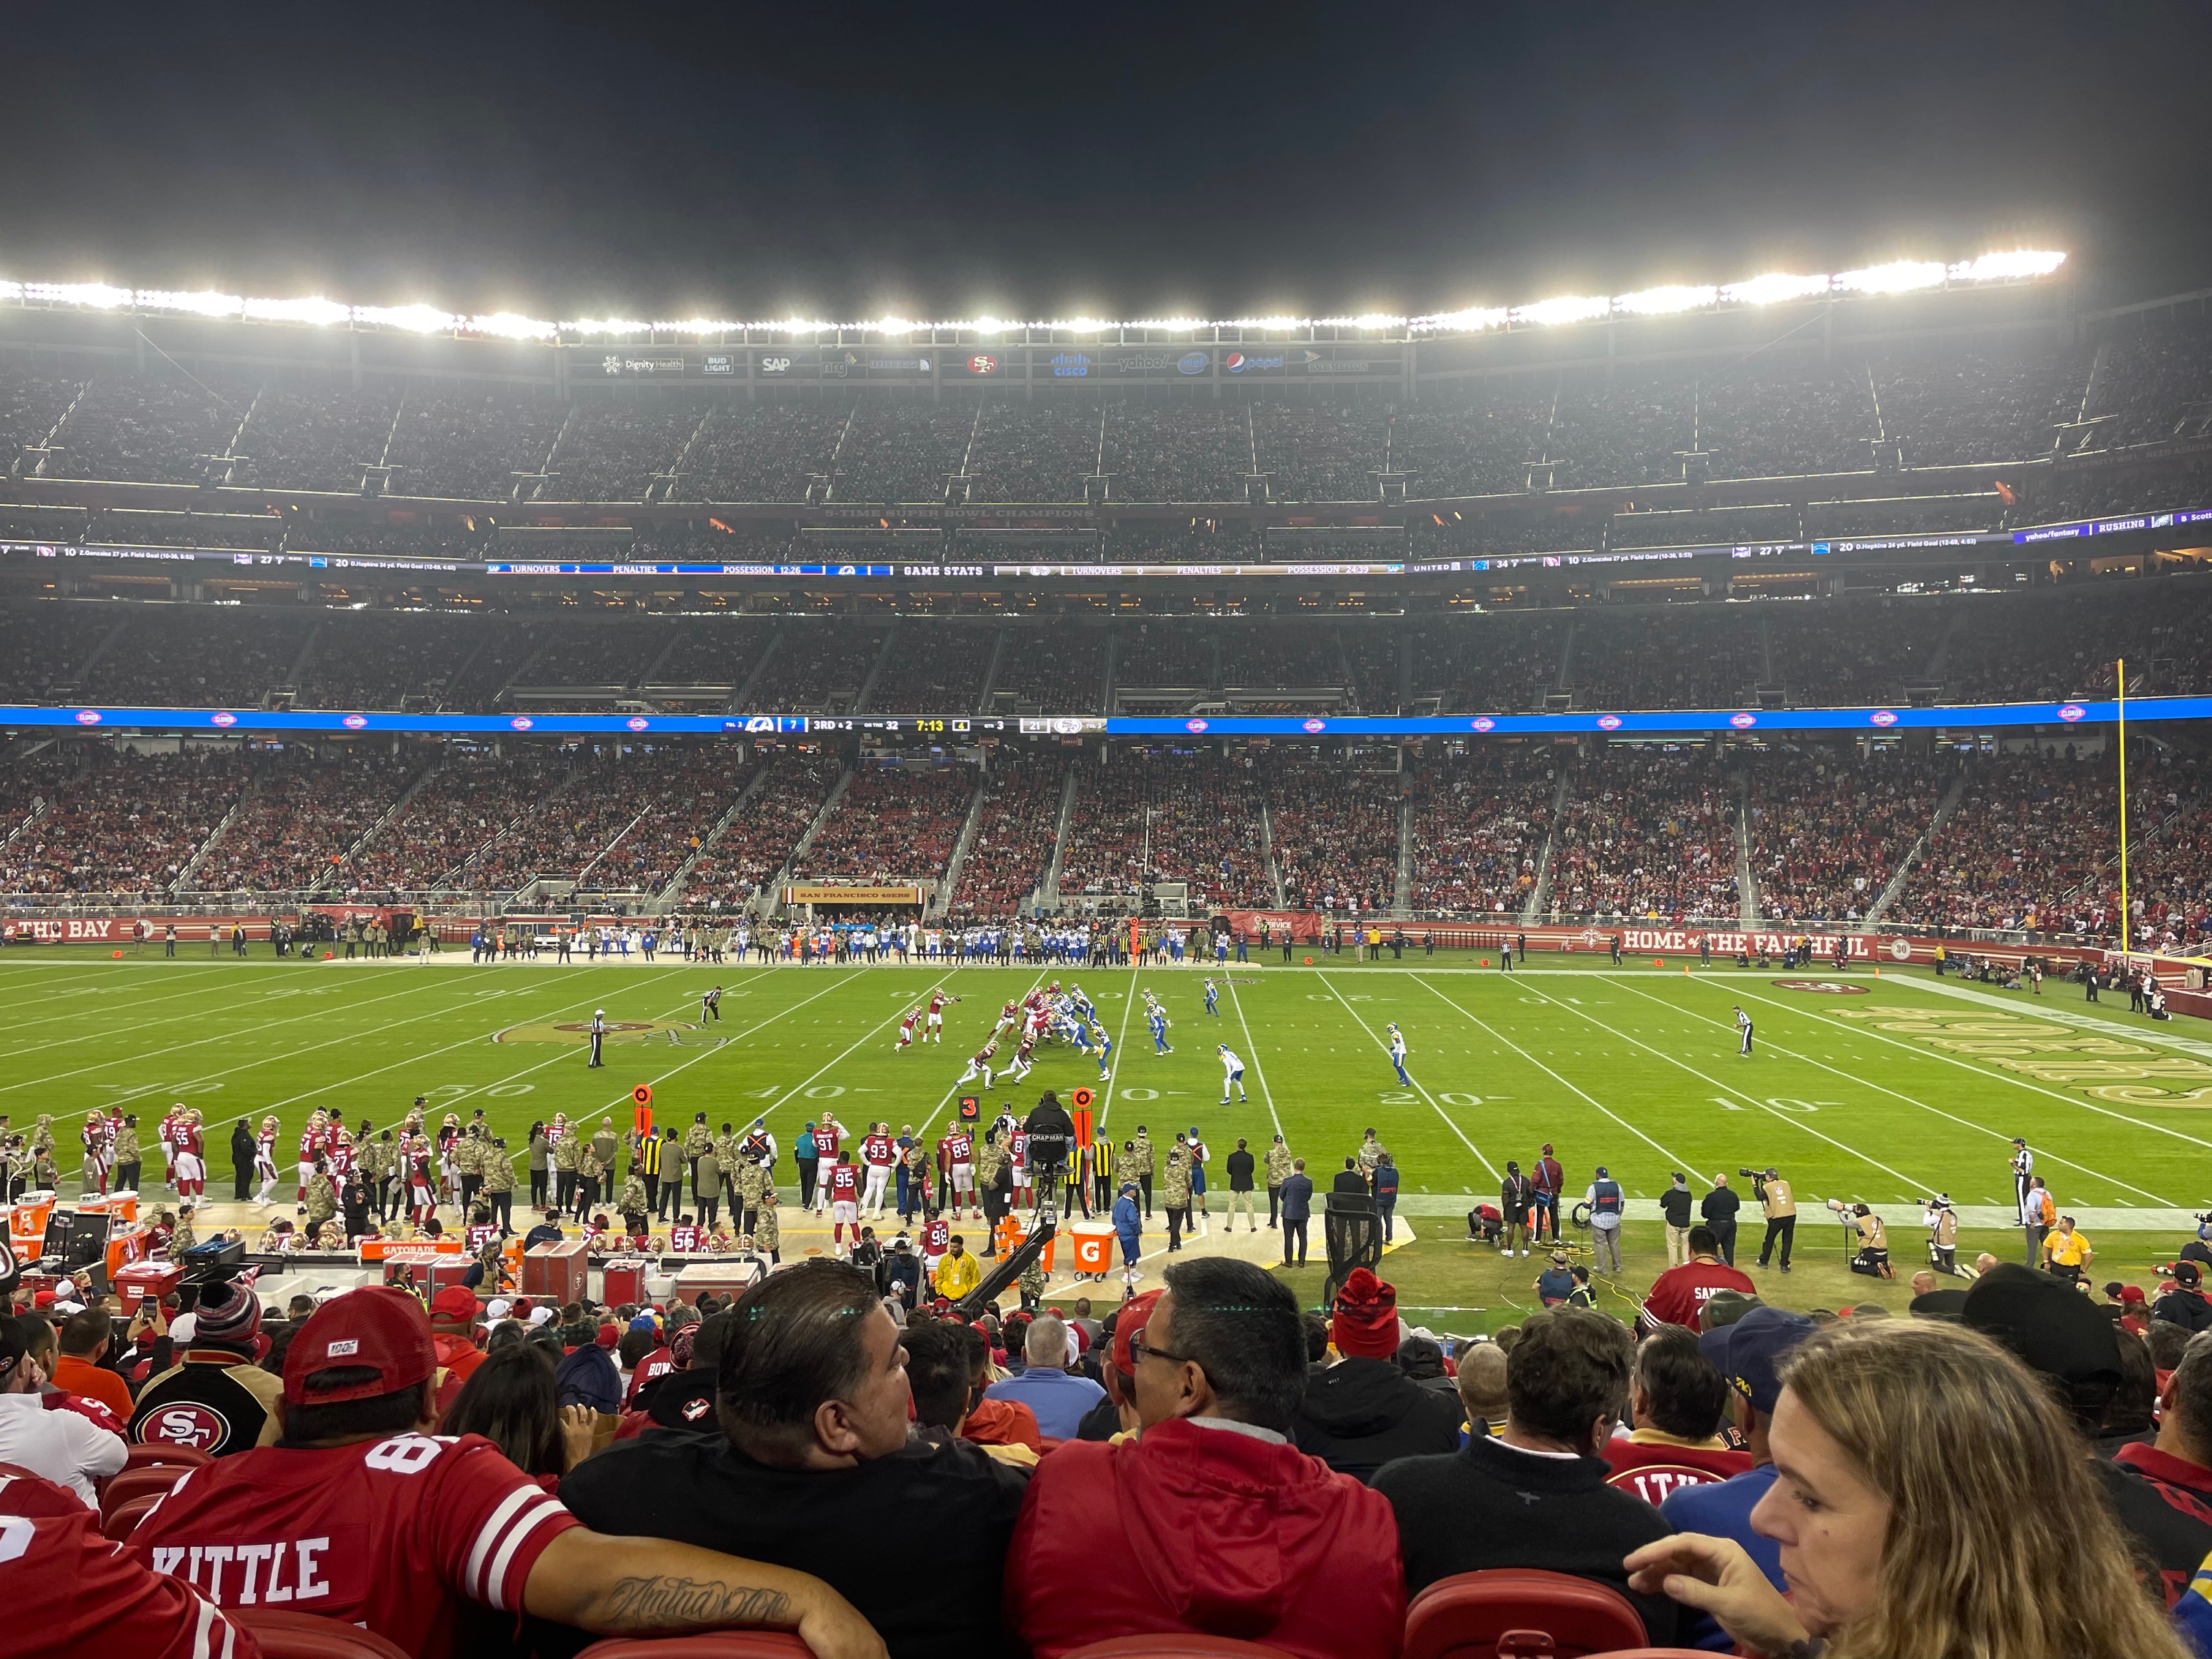 Seats Rights for 49ers Tickets for Sale